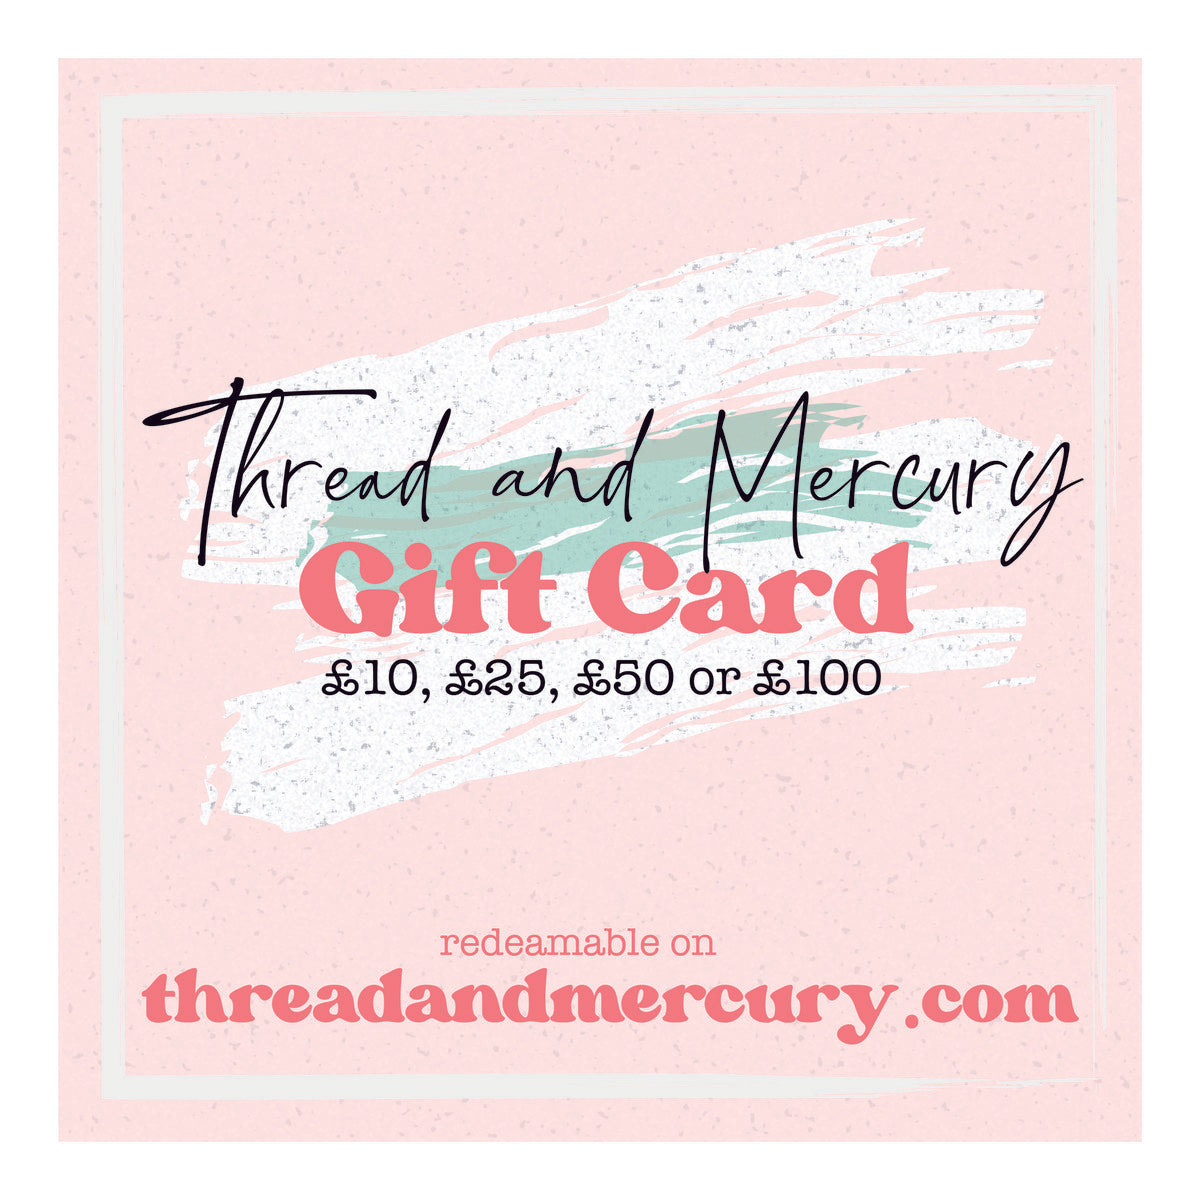 gift card available for needlepoint, cross stitch or tapestry projects